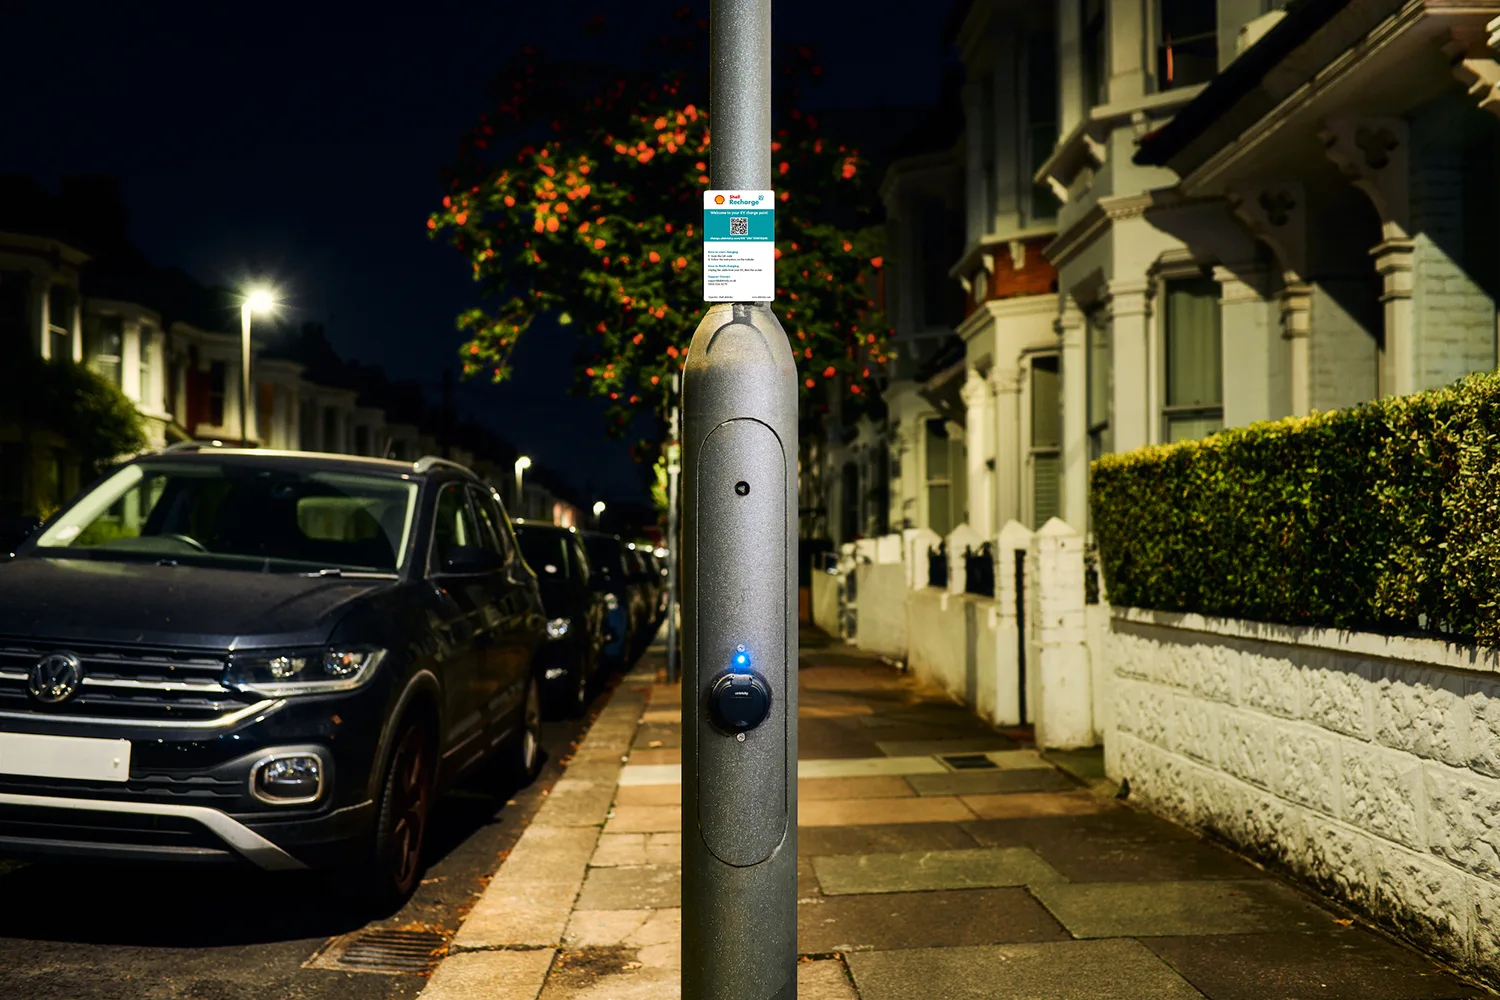 An ubitricity-operated Shell Recharge lamppost charging station which offers Smart Charging, a way to skip charging during peak hours to save money on your charge.